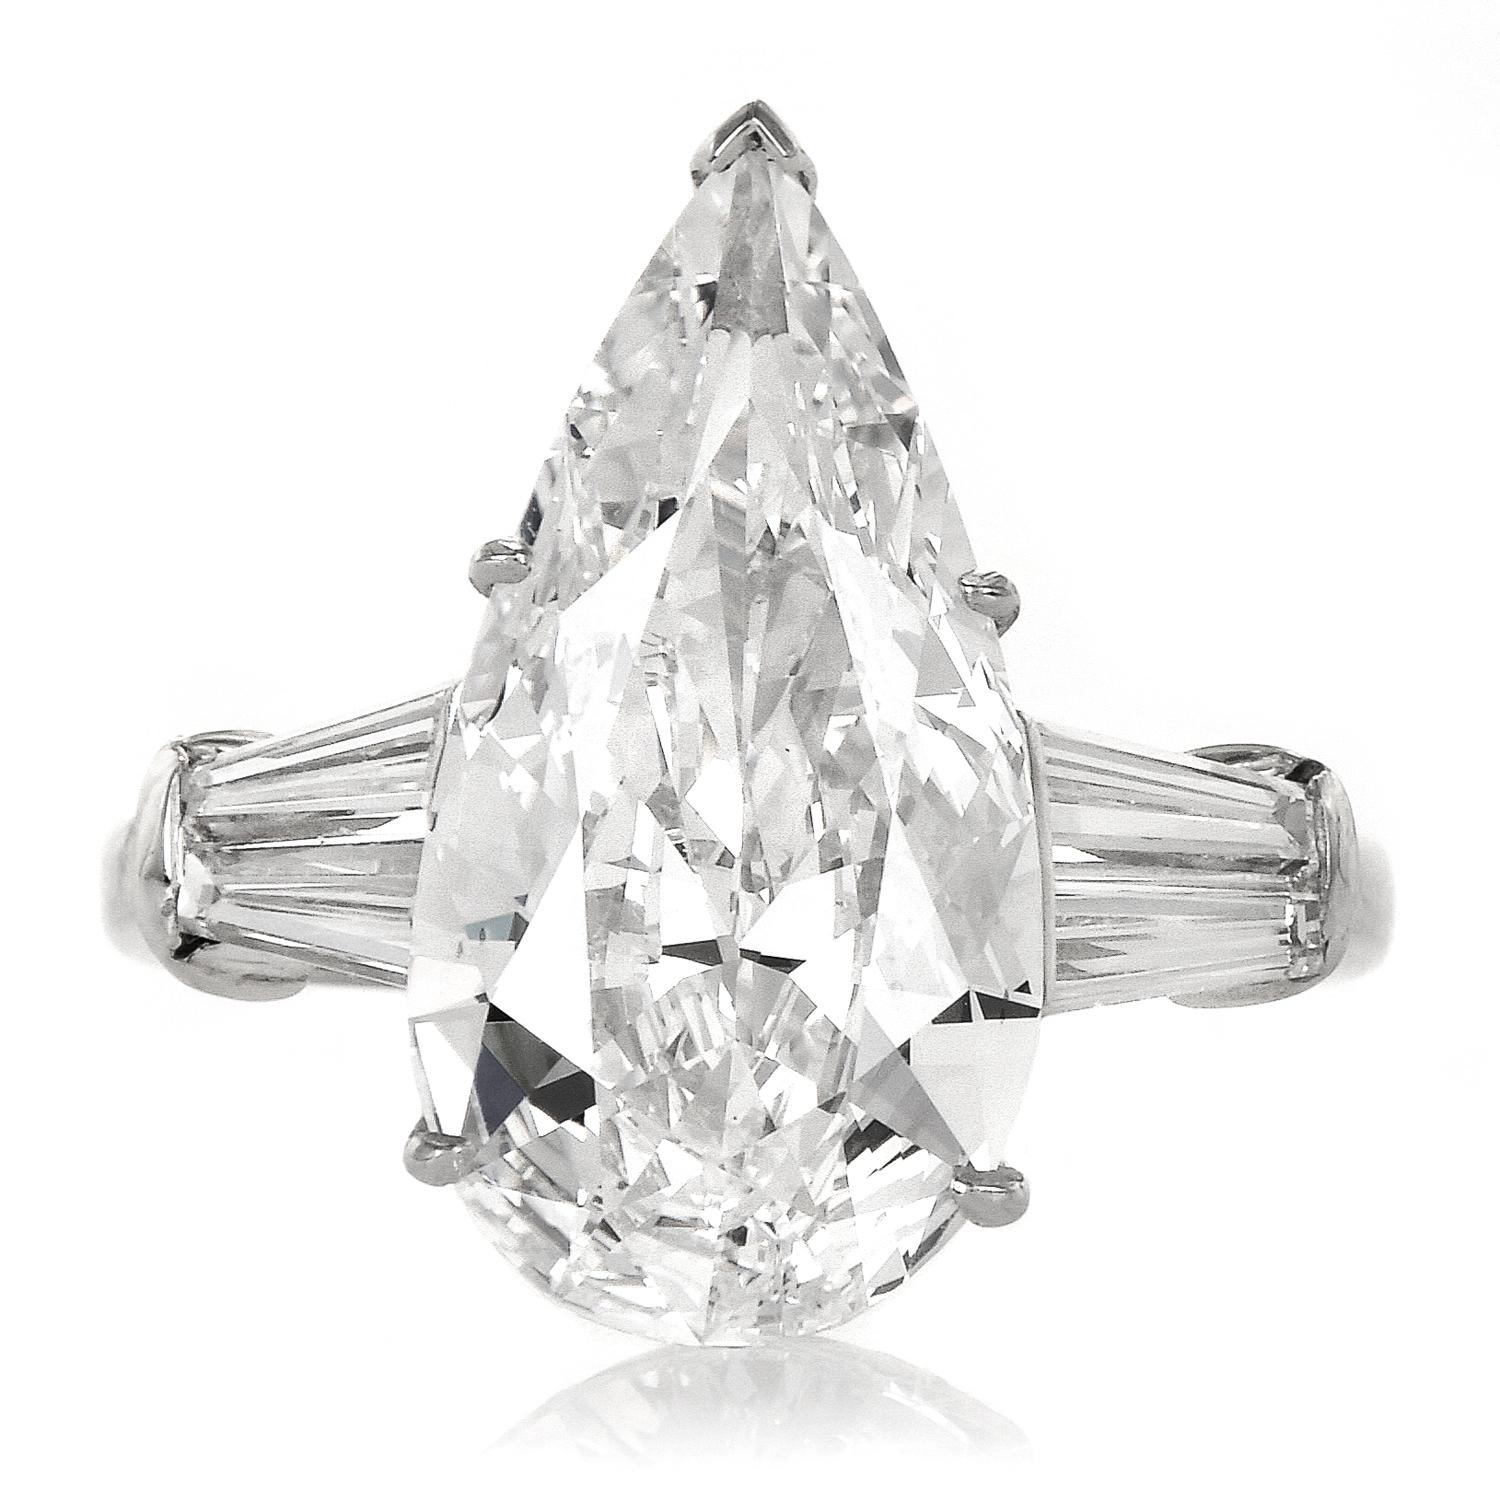 This exquisite diamond engagement ring is centered by one elongated pear shape diamond of approx. 6.16cttw. GIA graded the diamond, with the highest color grade, D color, and an excellent clarity grade of VS1.

The sides are graced by 4 tapered